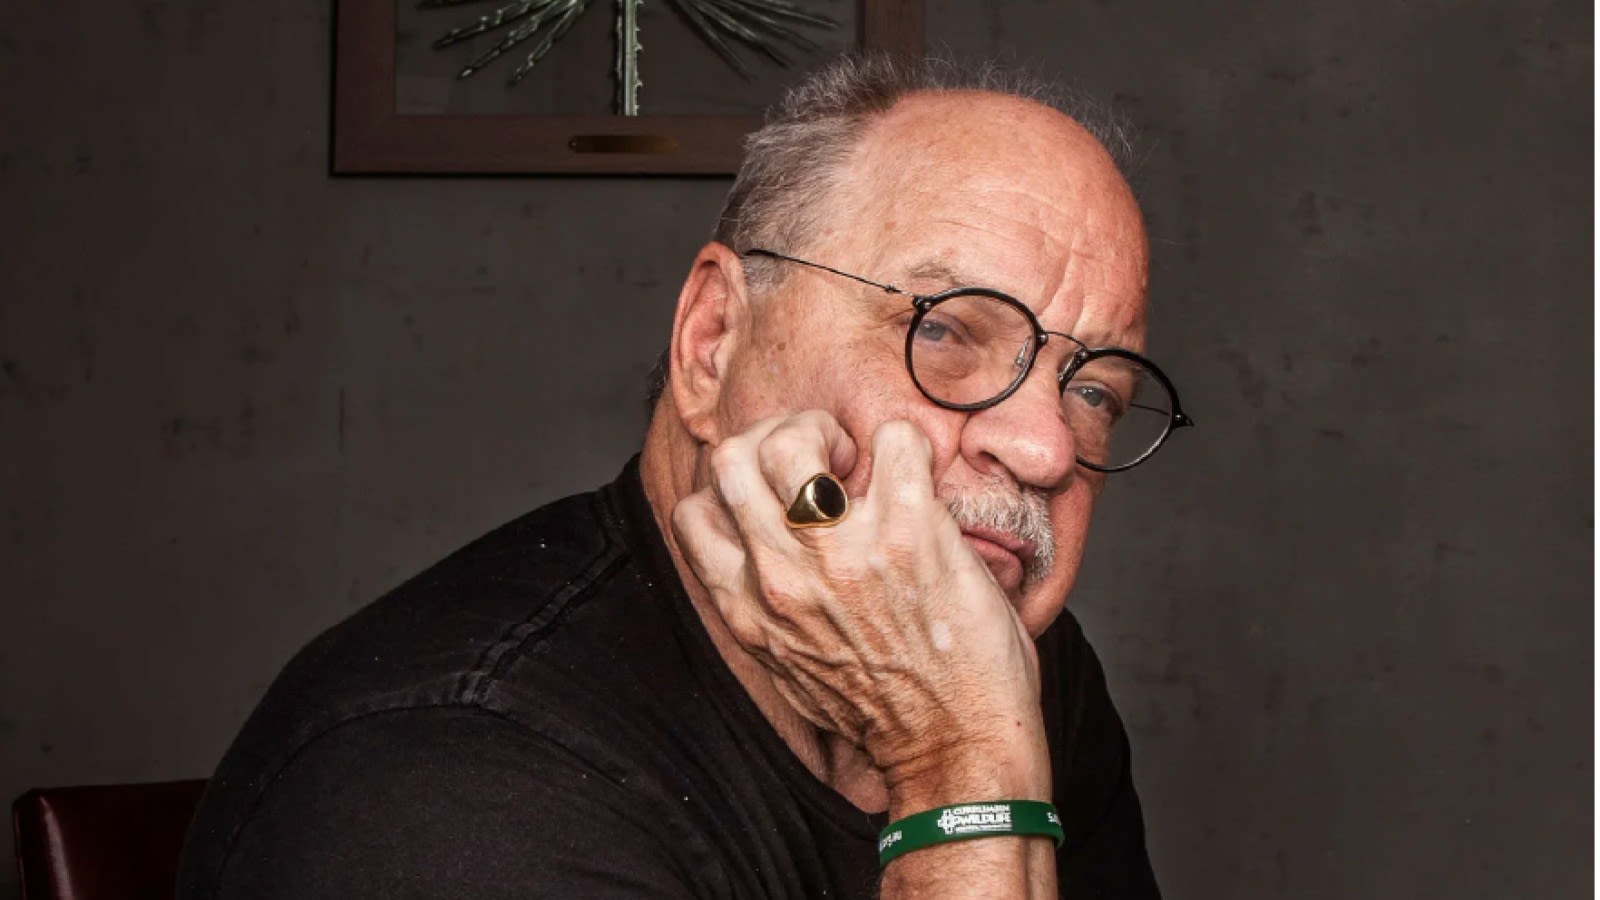 Paul Schrader in Cannes: “Every Time I’m Getting Ready to Die, I Have a New Idea”